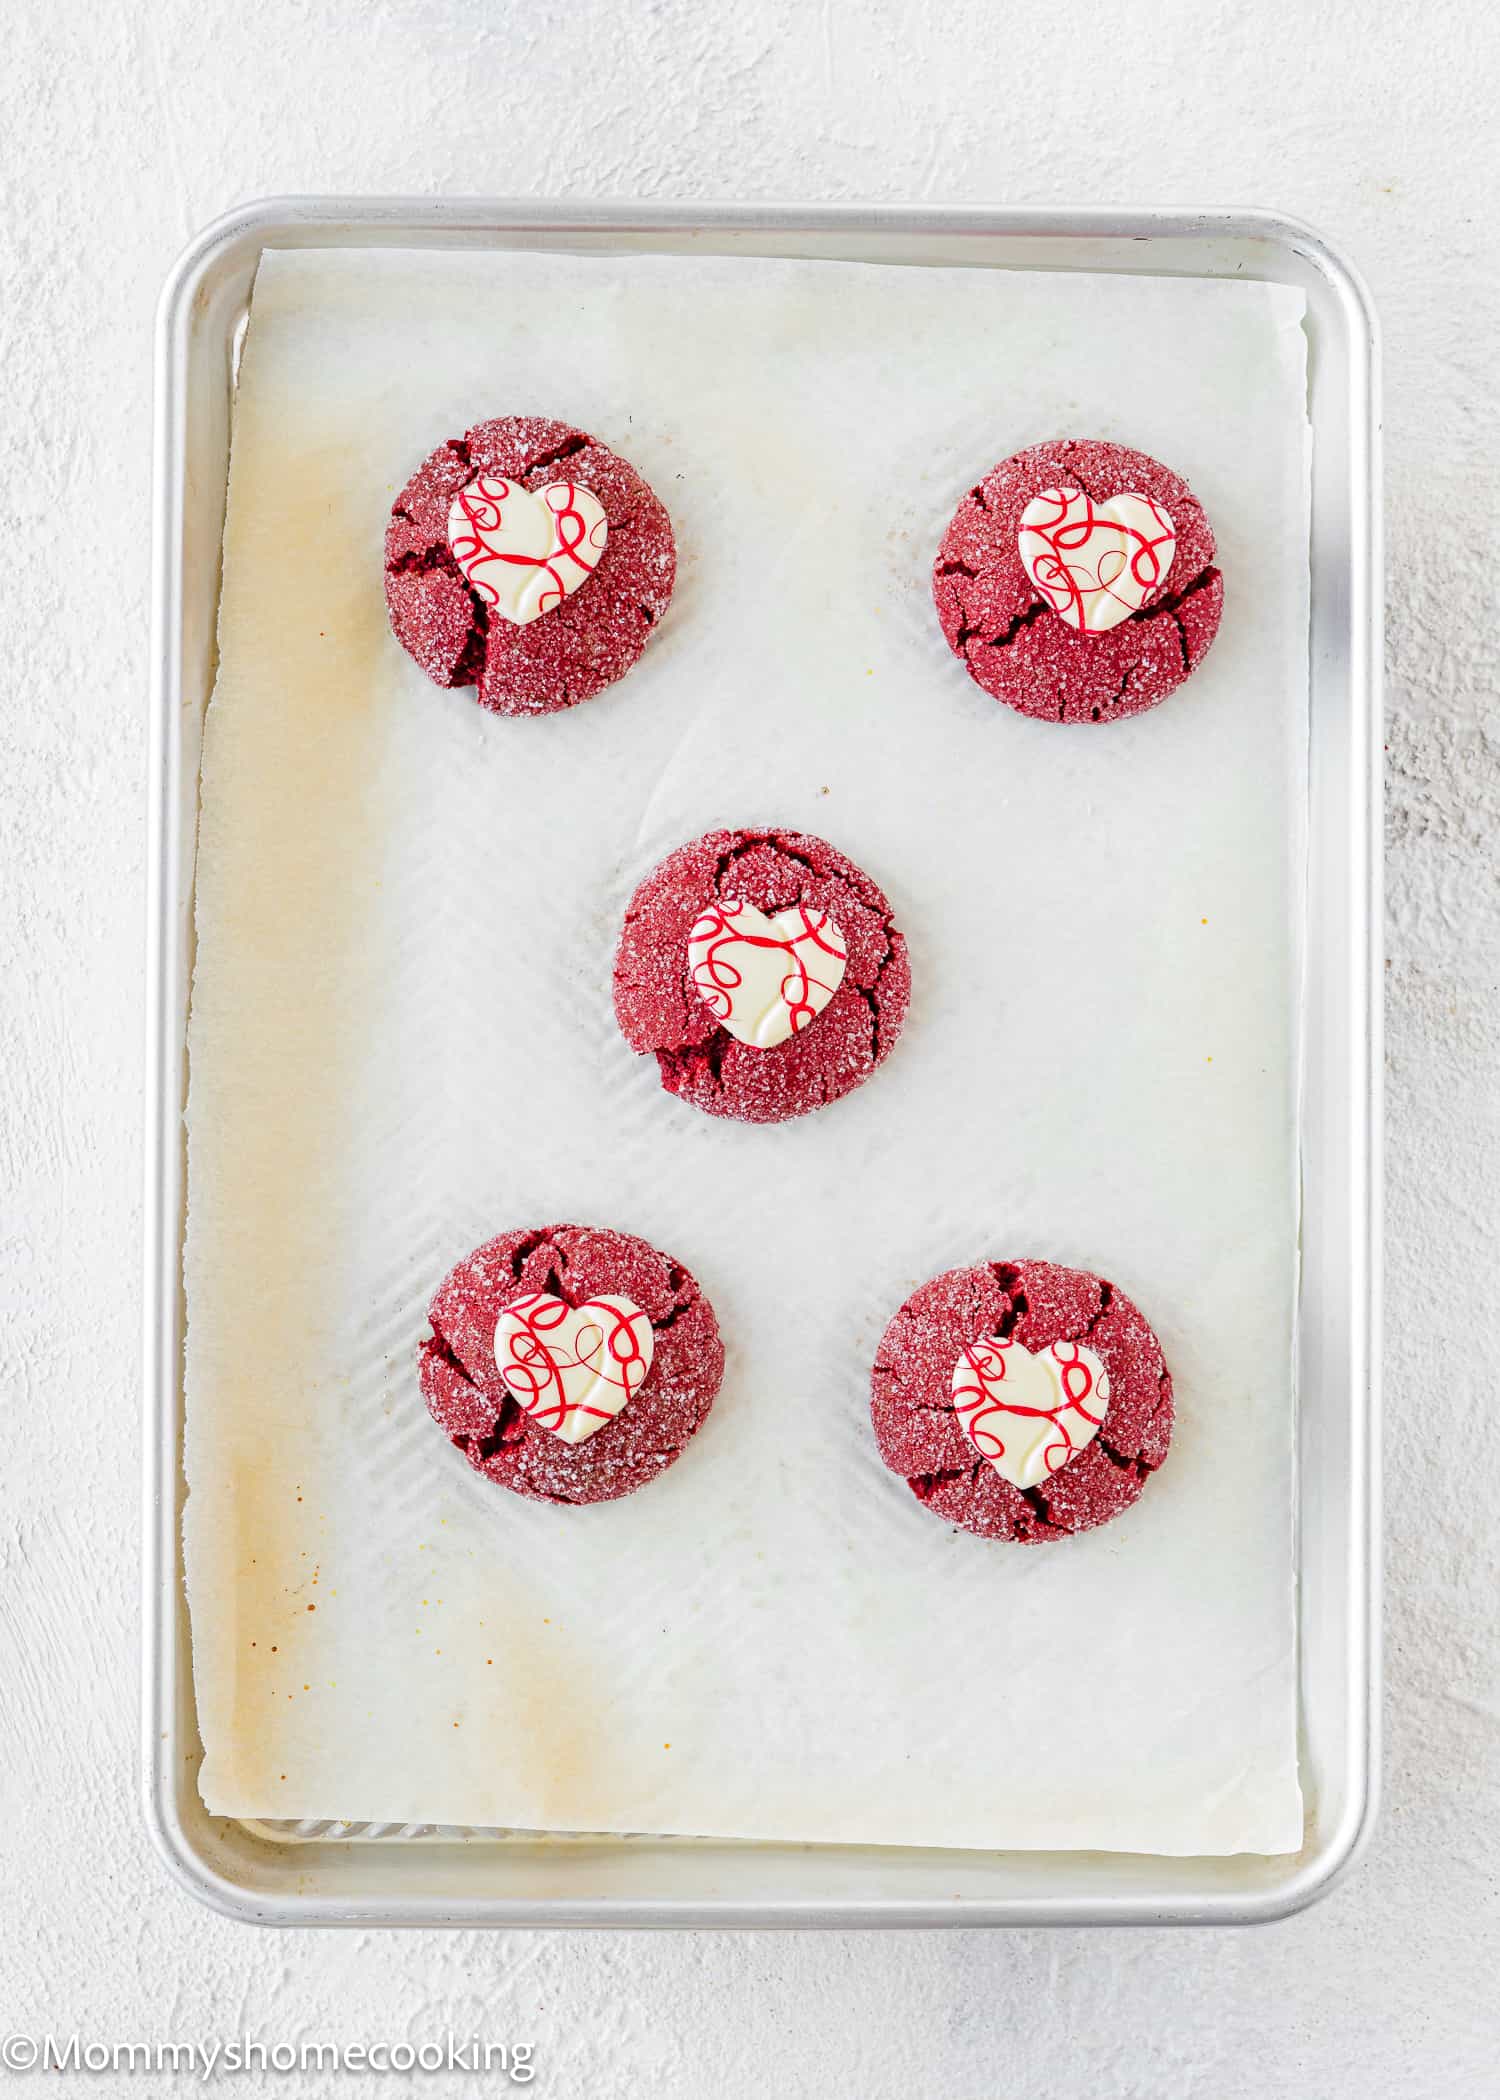 baked Cake Mix Valentine Cookies in a baking sheet topped with white chocolate hearts.